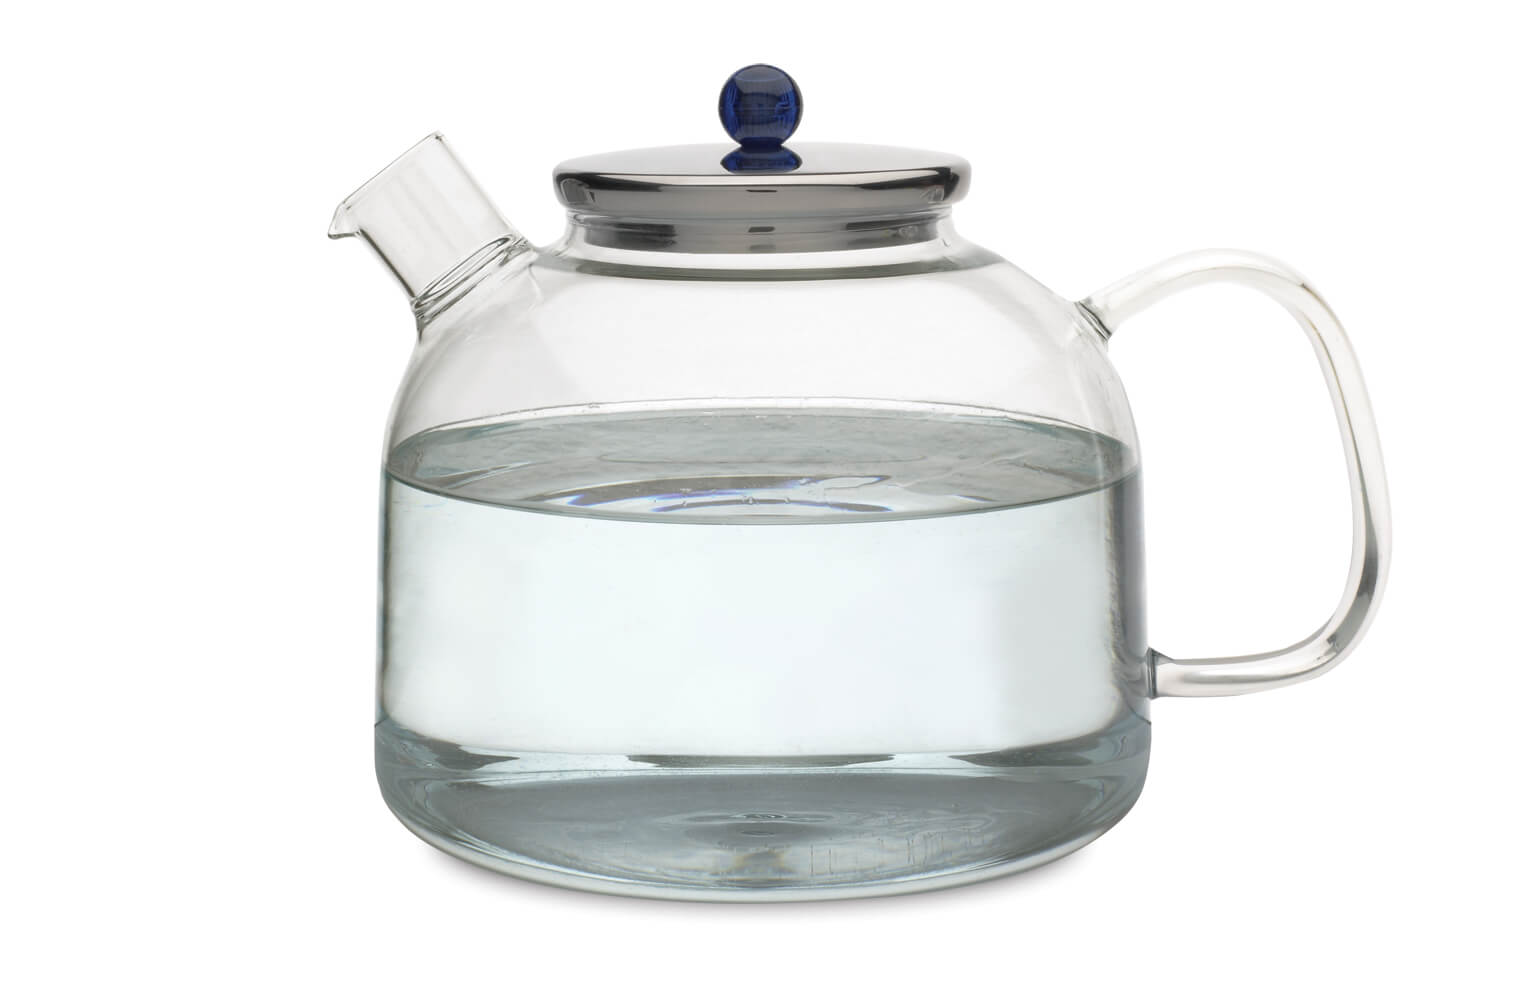 https://www.adagio.com/images5/products_retina/water_kettle.jpg